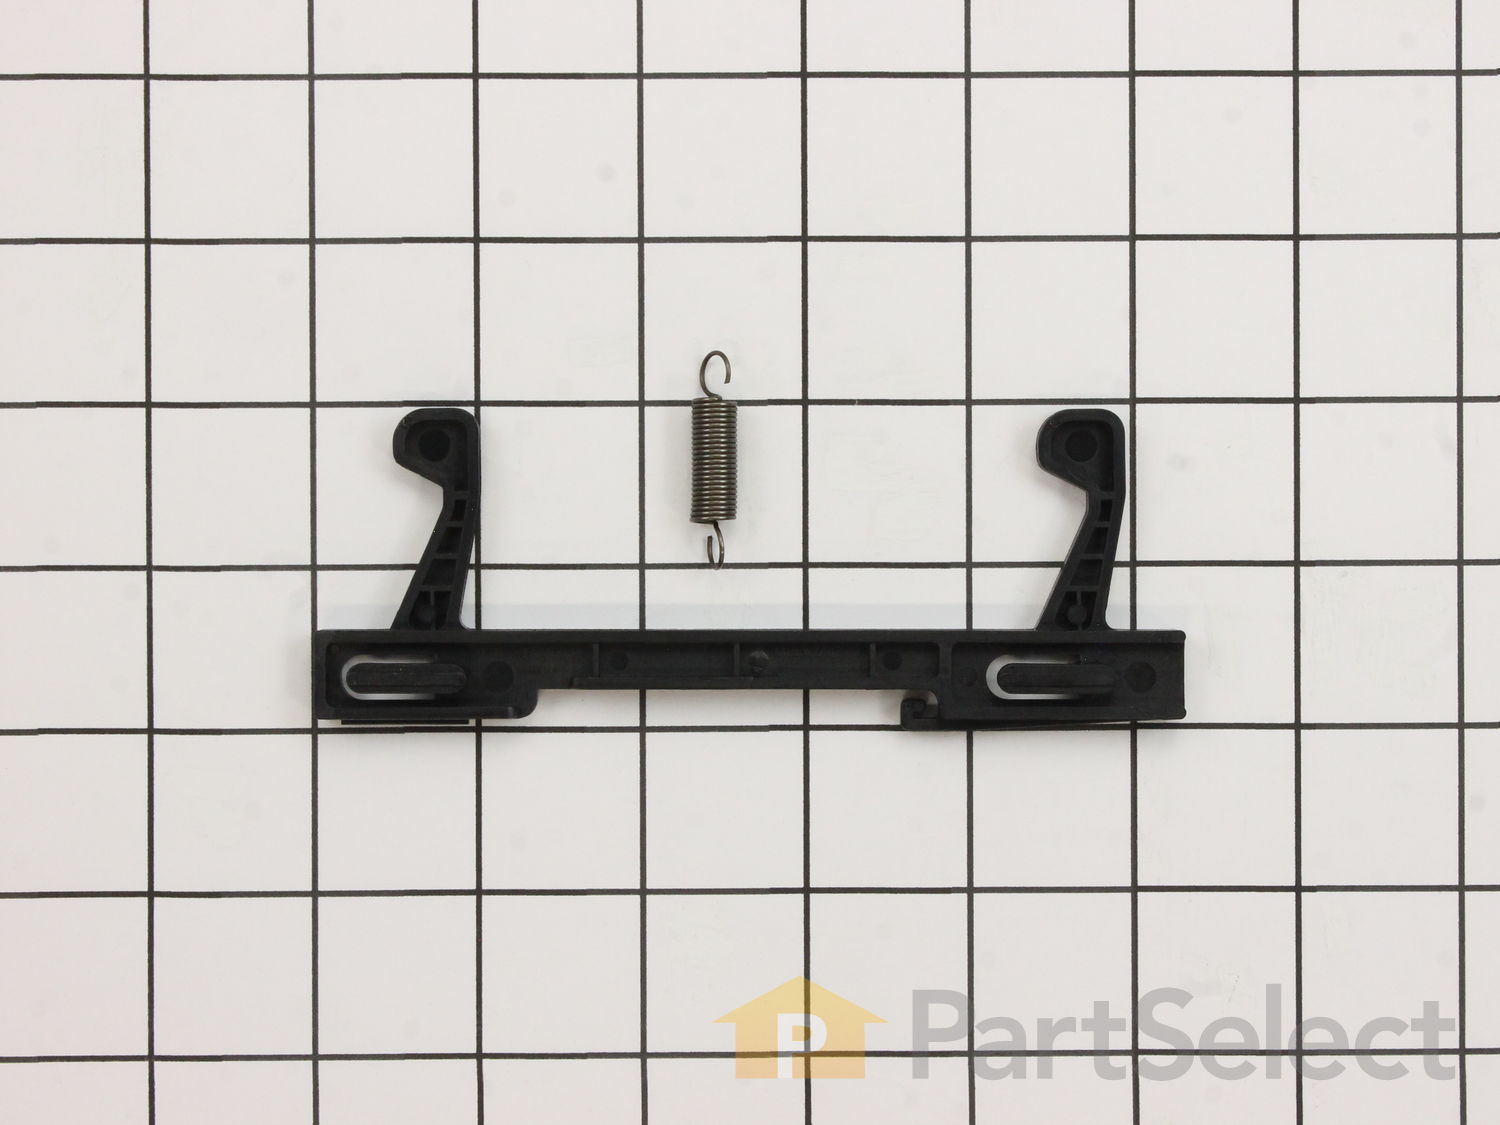 Details about   WB06X10610 Microwave Door Latch 